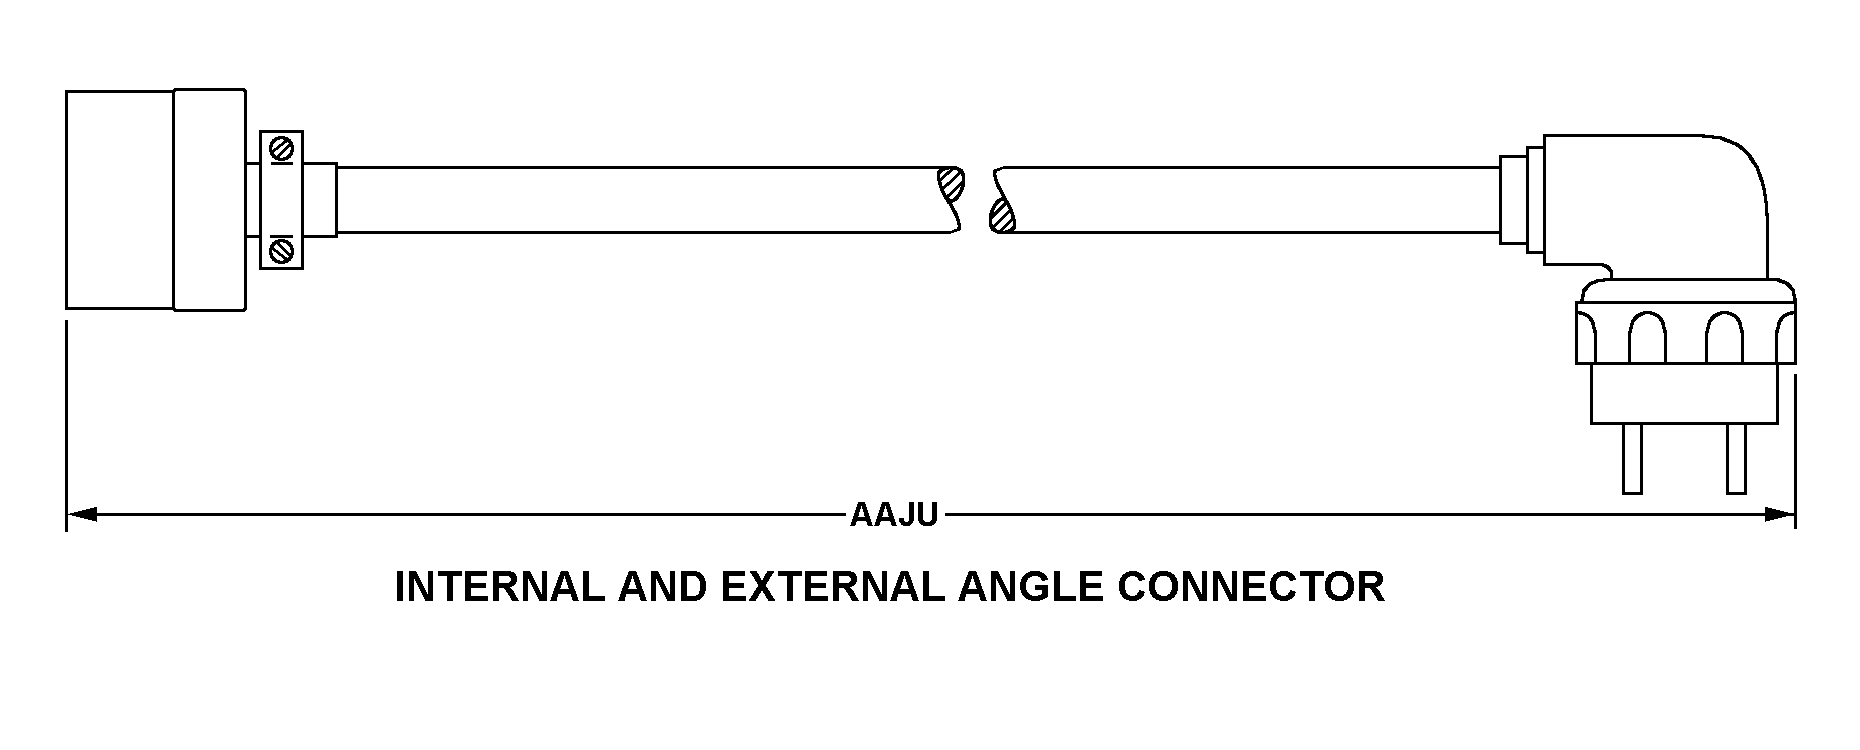 INTERNAL AND EXTERNAL ANGLE CONNECTOR style nsn 5995-01-073-6781